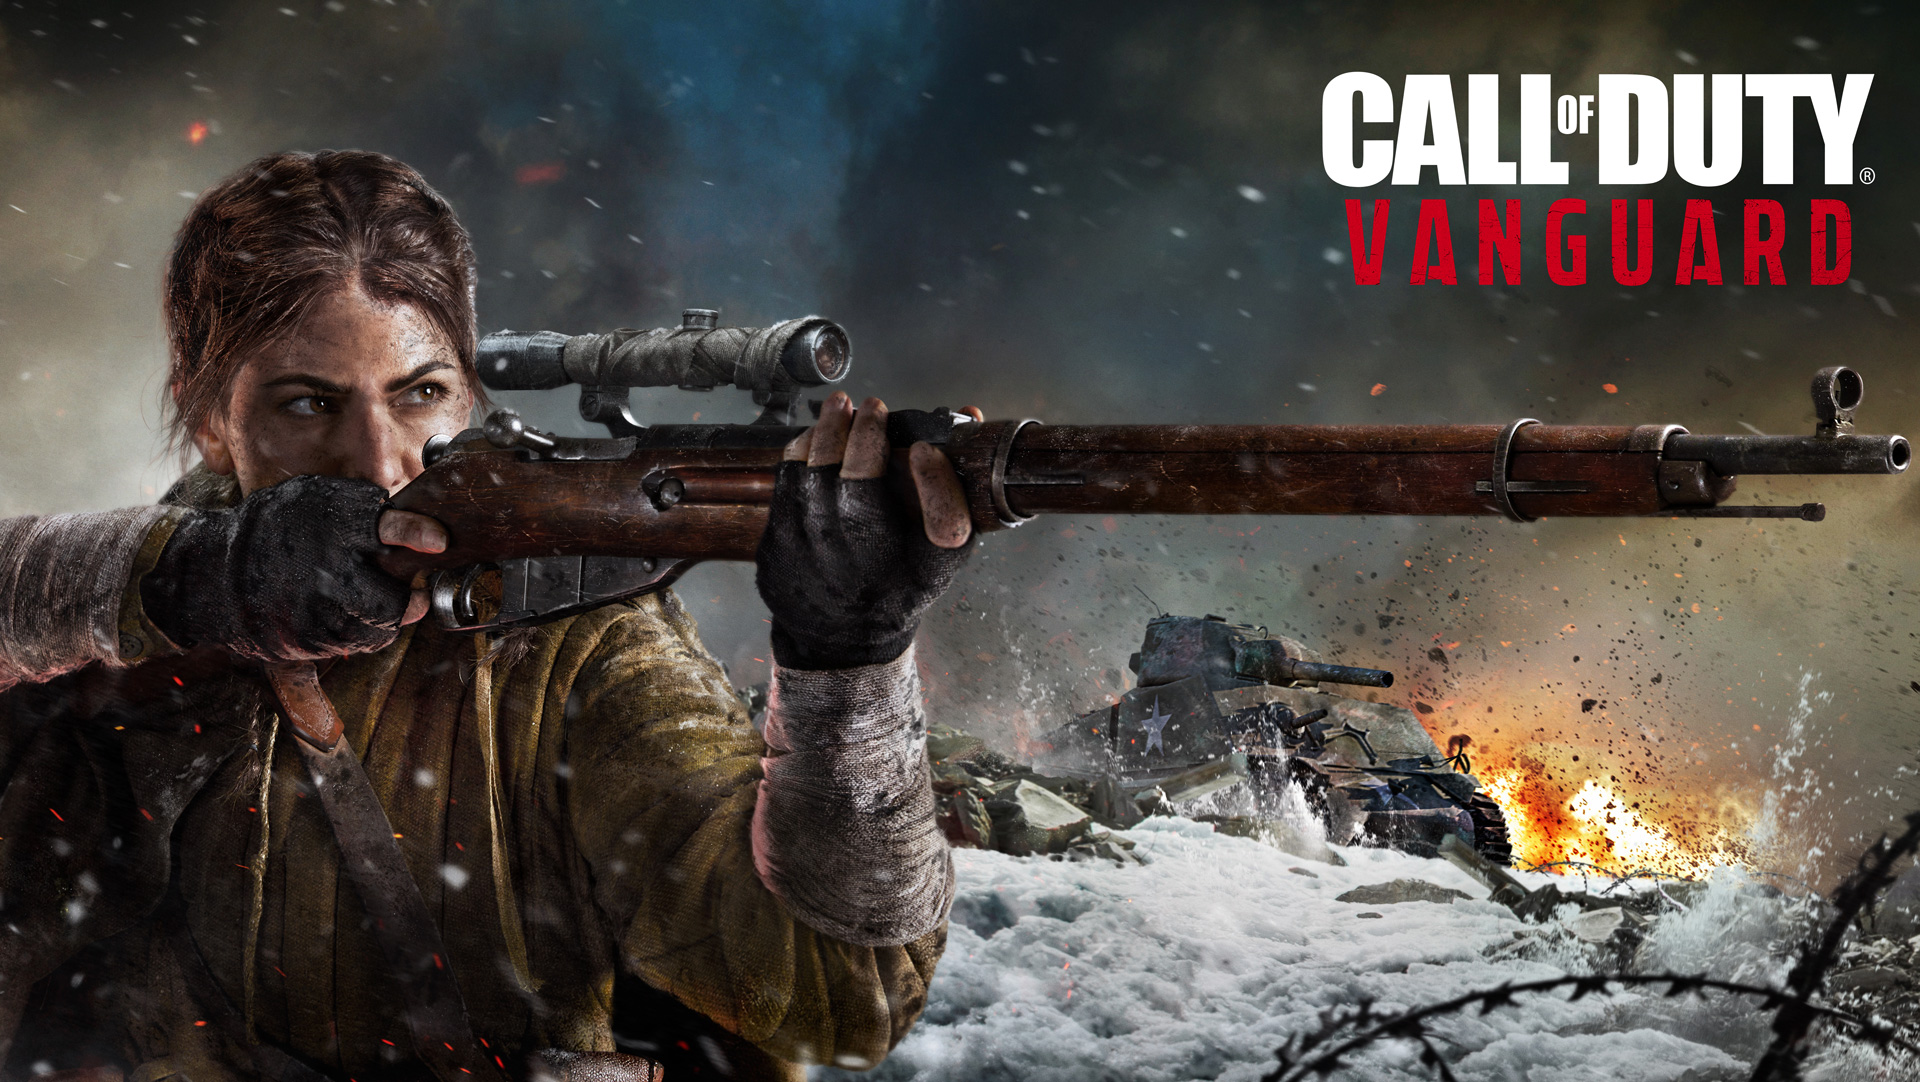 Introducing Polina Petrova and the Call of Duty: Vanguard Campaign